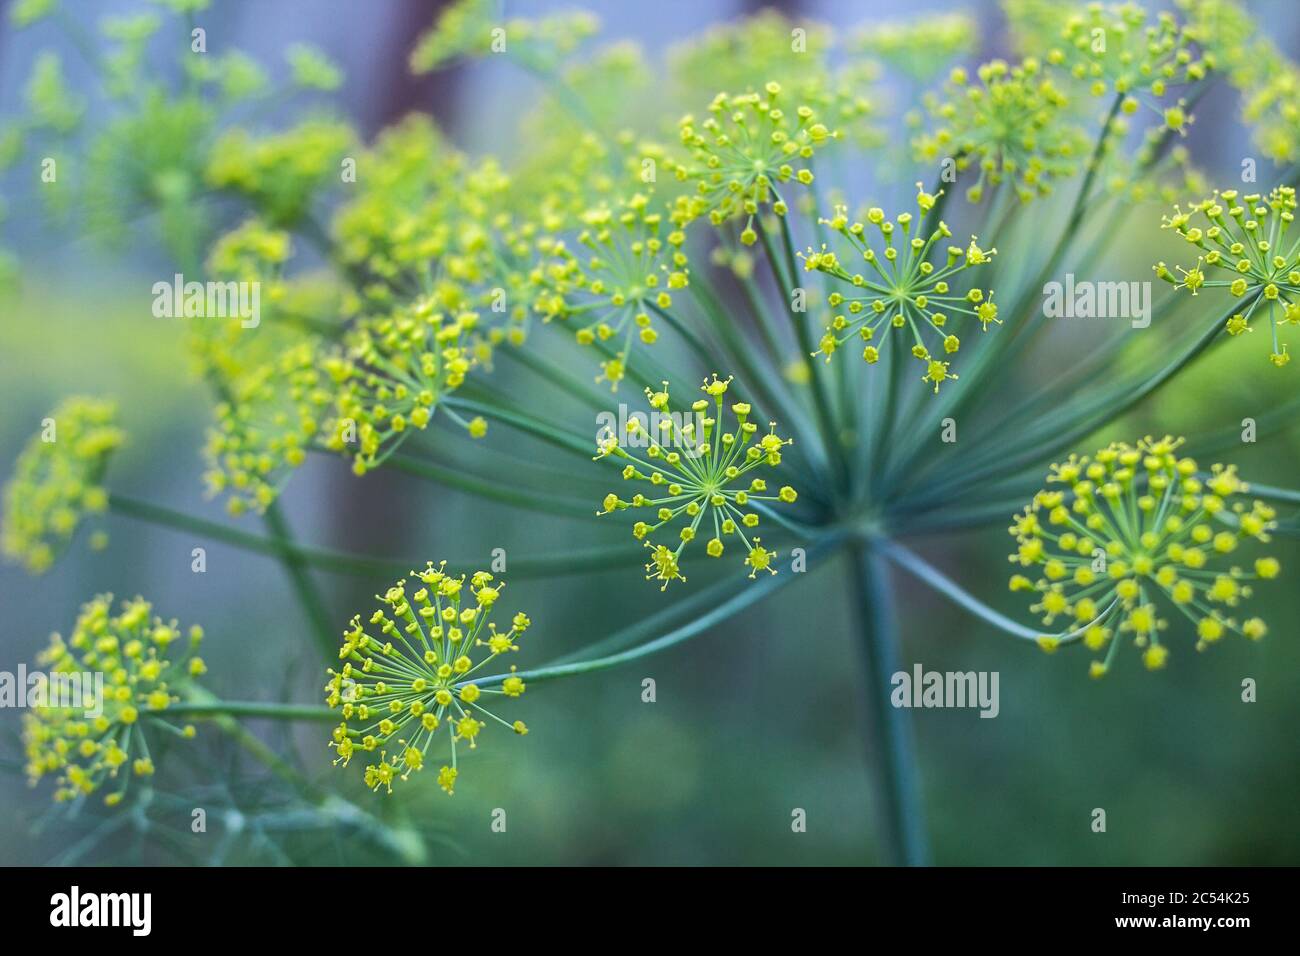 dill inflorescence close-up on a blurry background Stock Photo